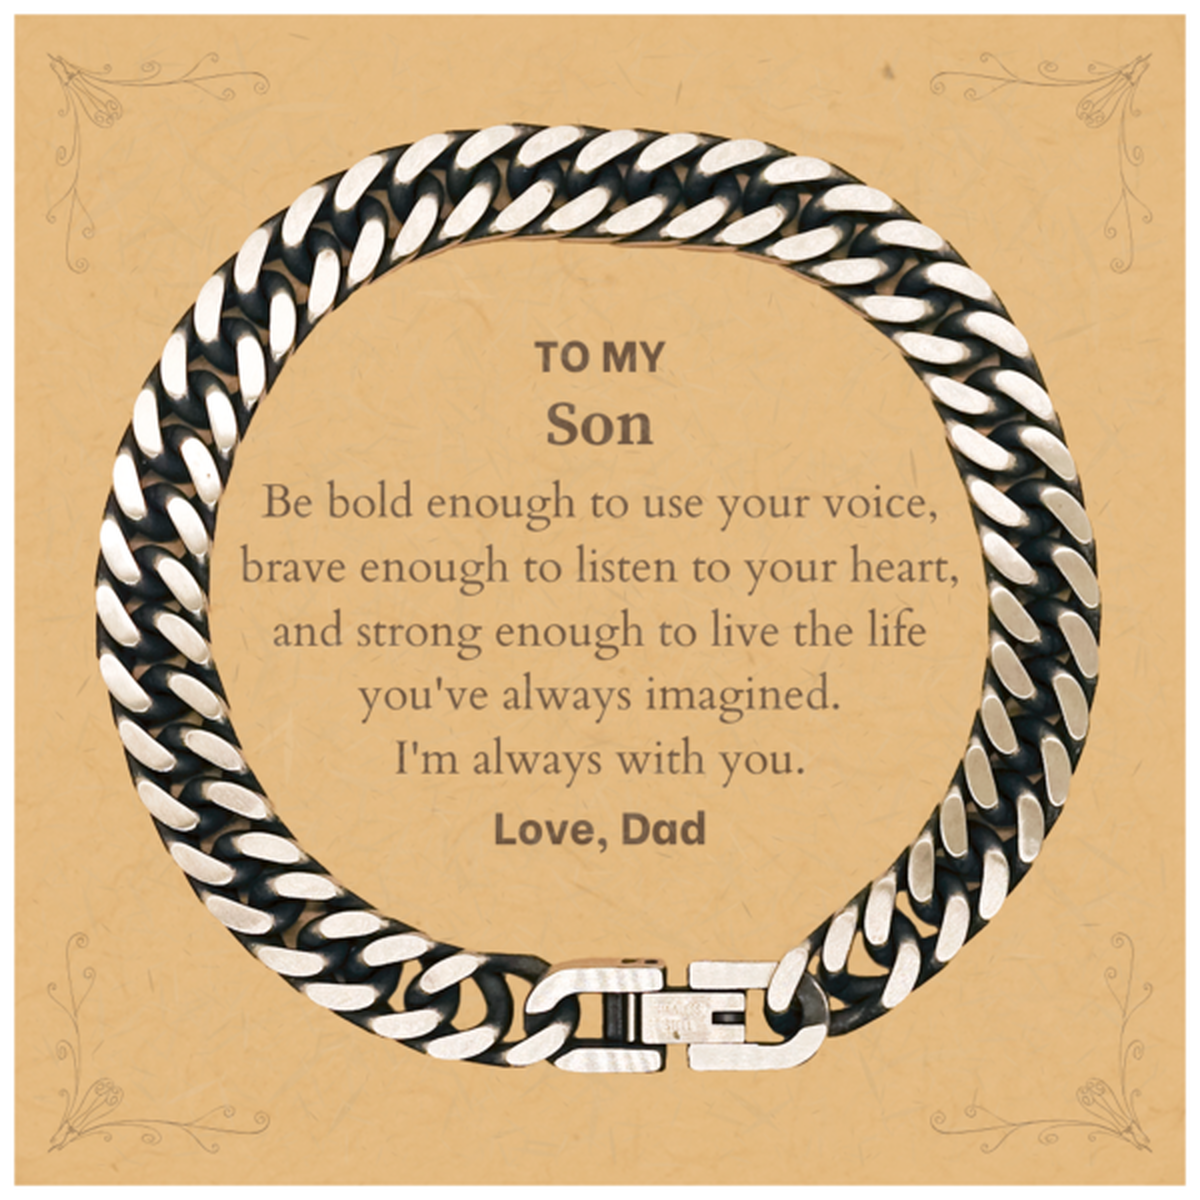 Keepsake Son Cuban Link Chain Bracelet Gift Idea Graduation Christmas Birthday Son from Dad, Son Be bold enough to use your voice, brave enough to listen to your heart. Love, Dad